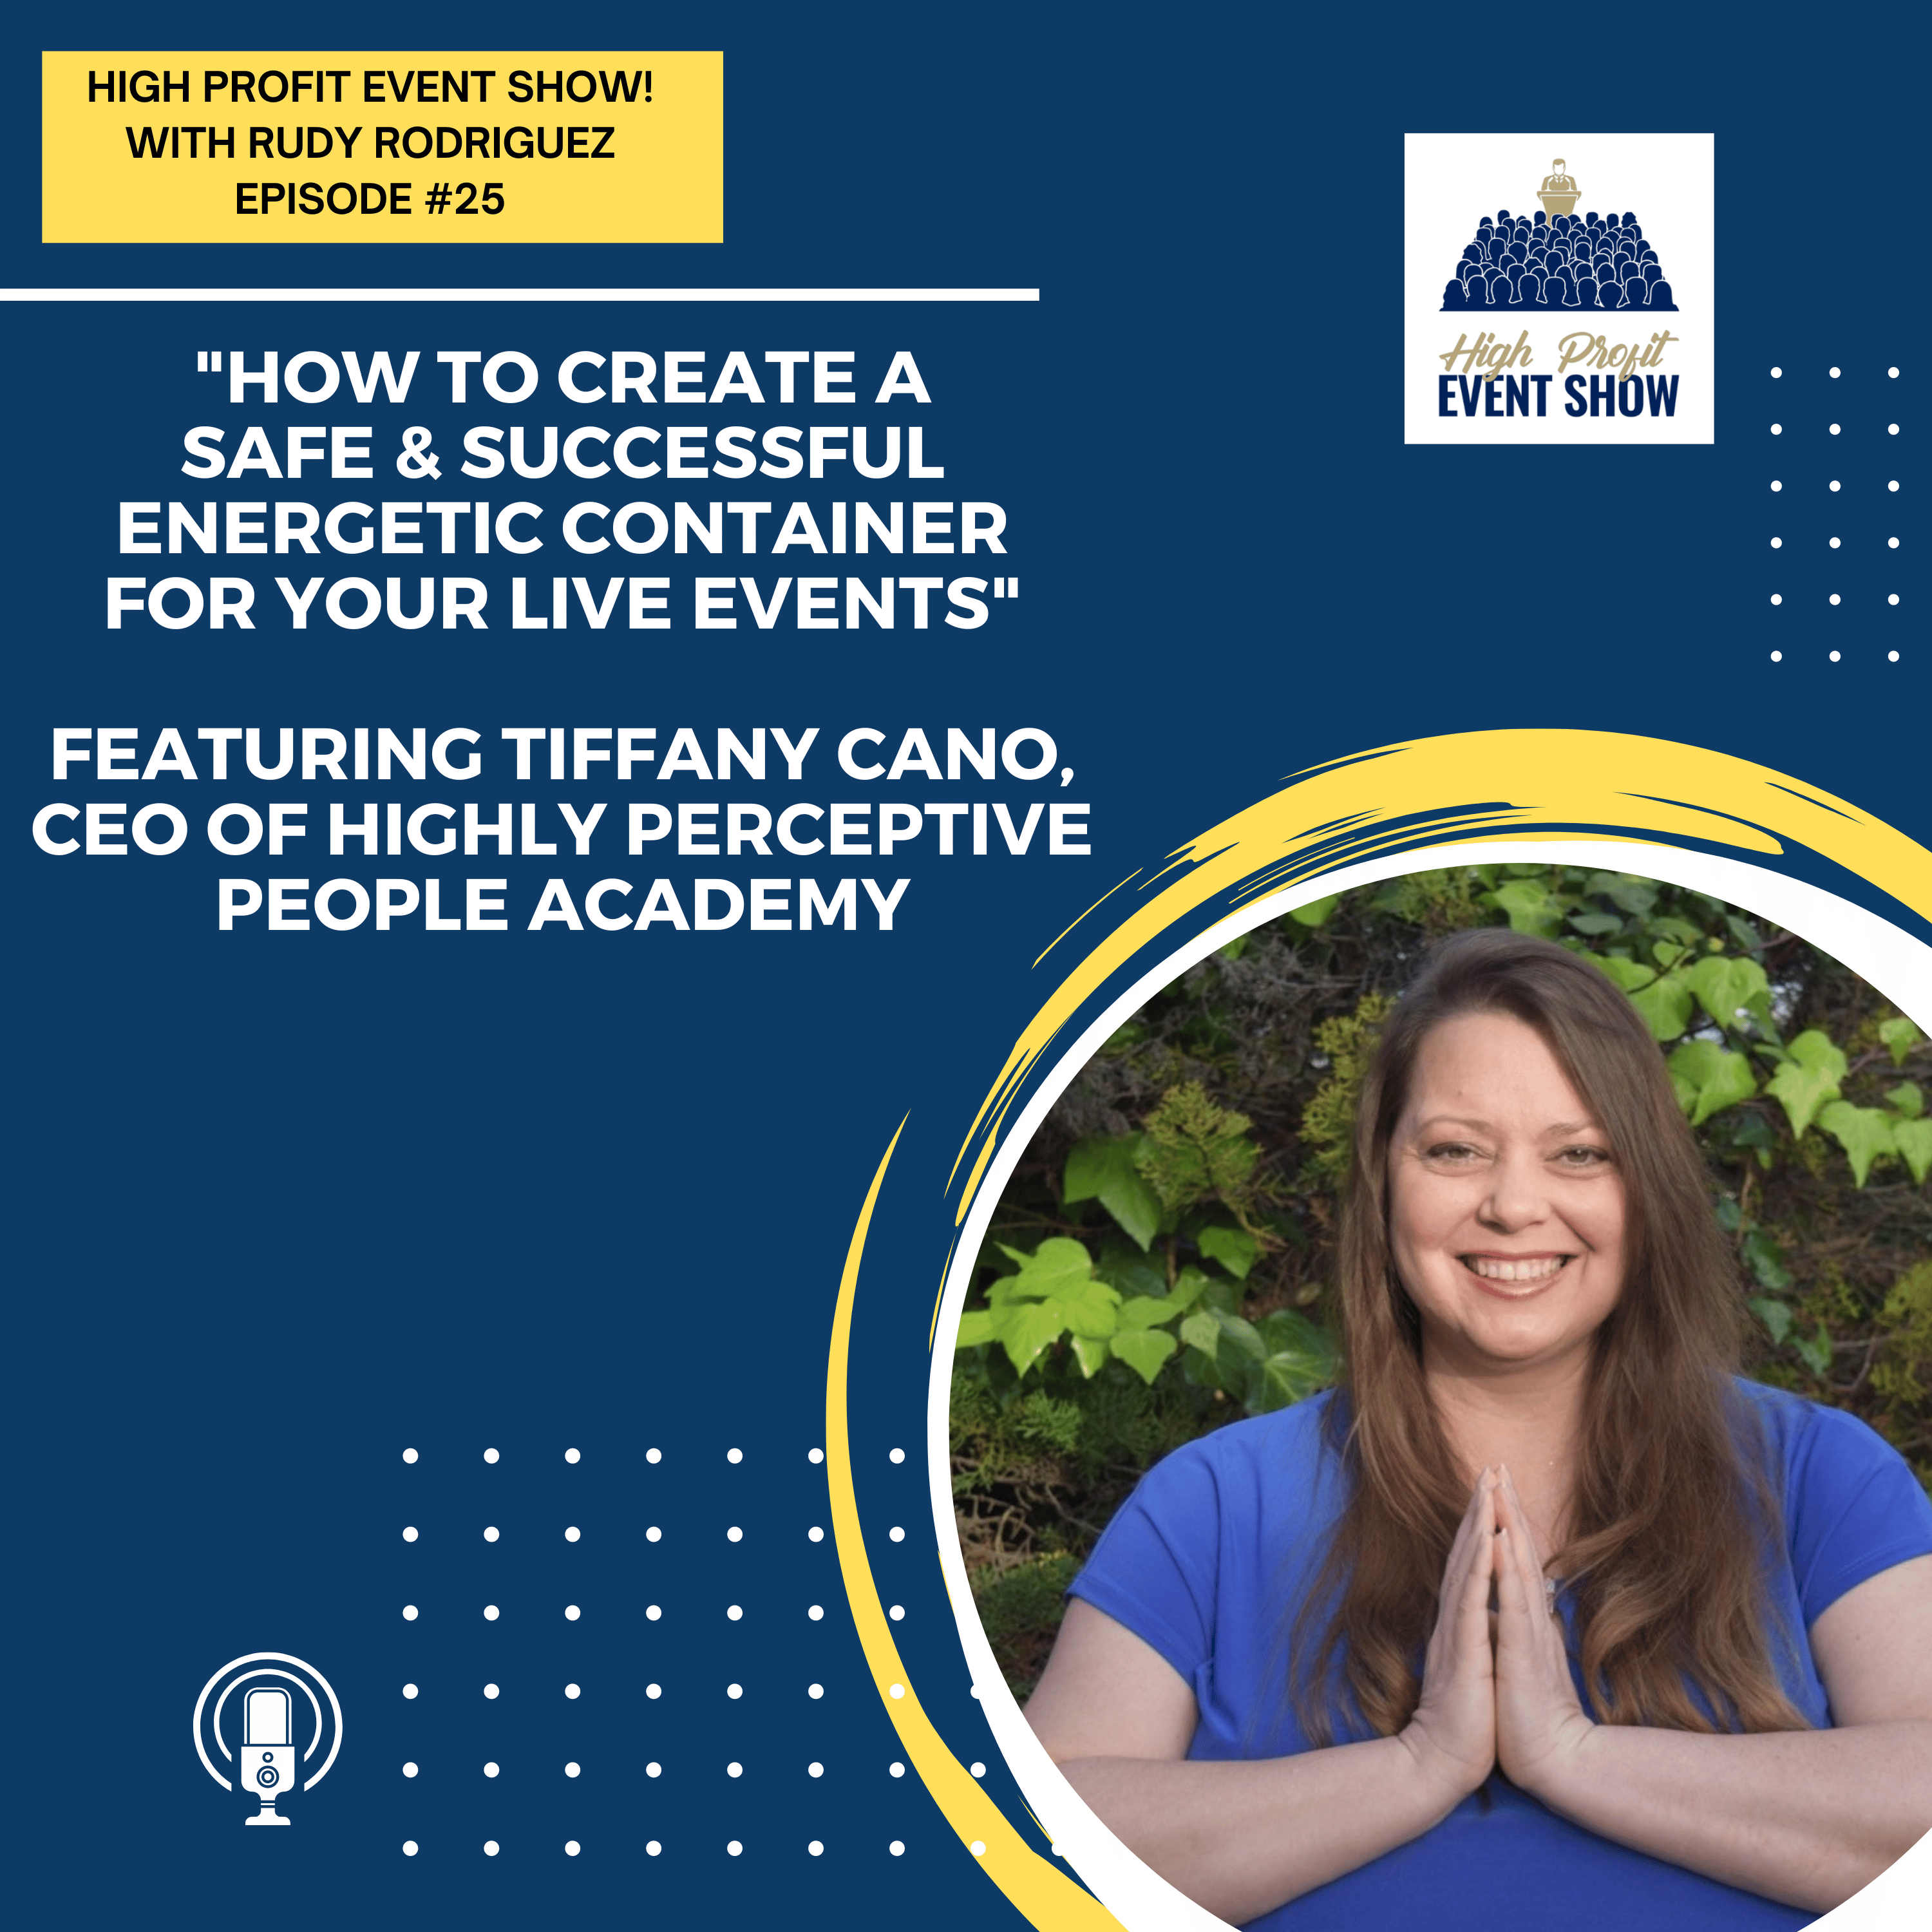 Episode 25: How to Create A Safe & Successful Energetic Container for Your Live Events with Tiffany Cano!